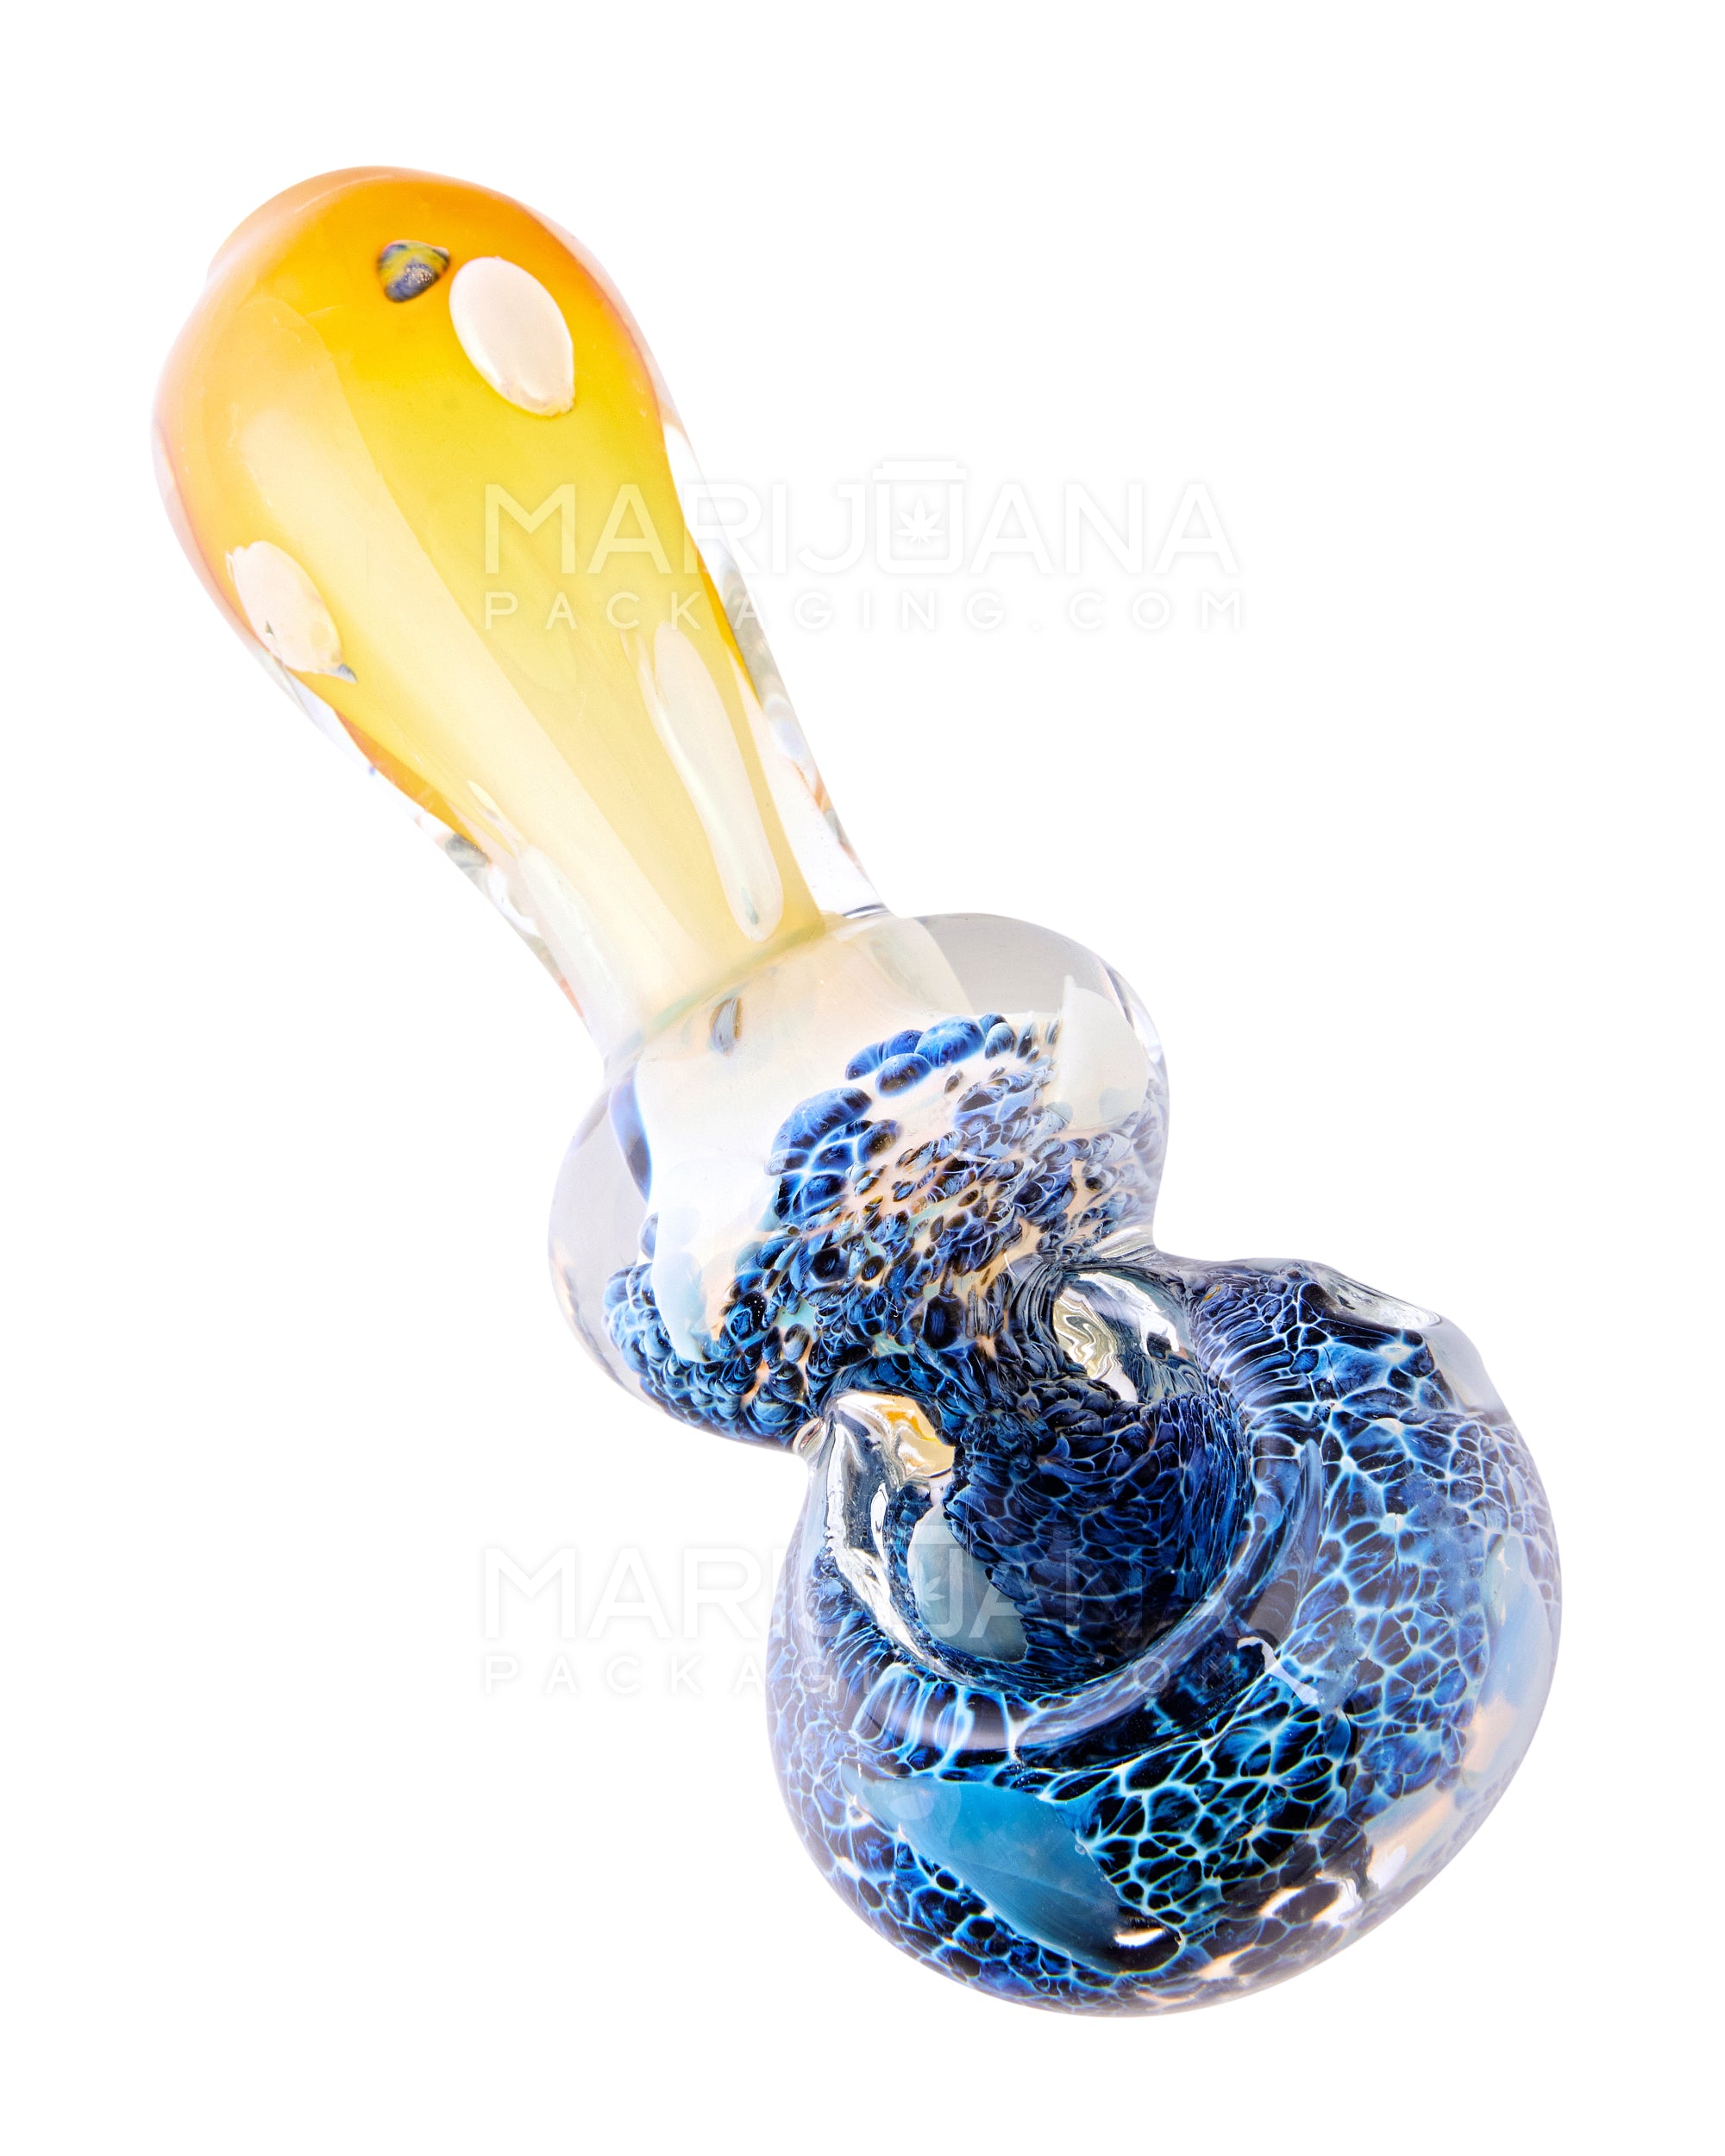 Glass Pipes, Weed Pipes